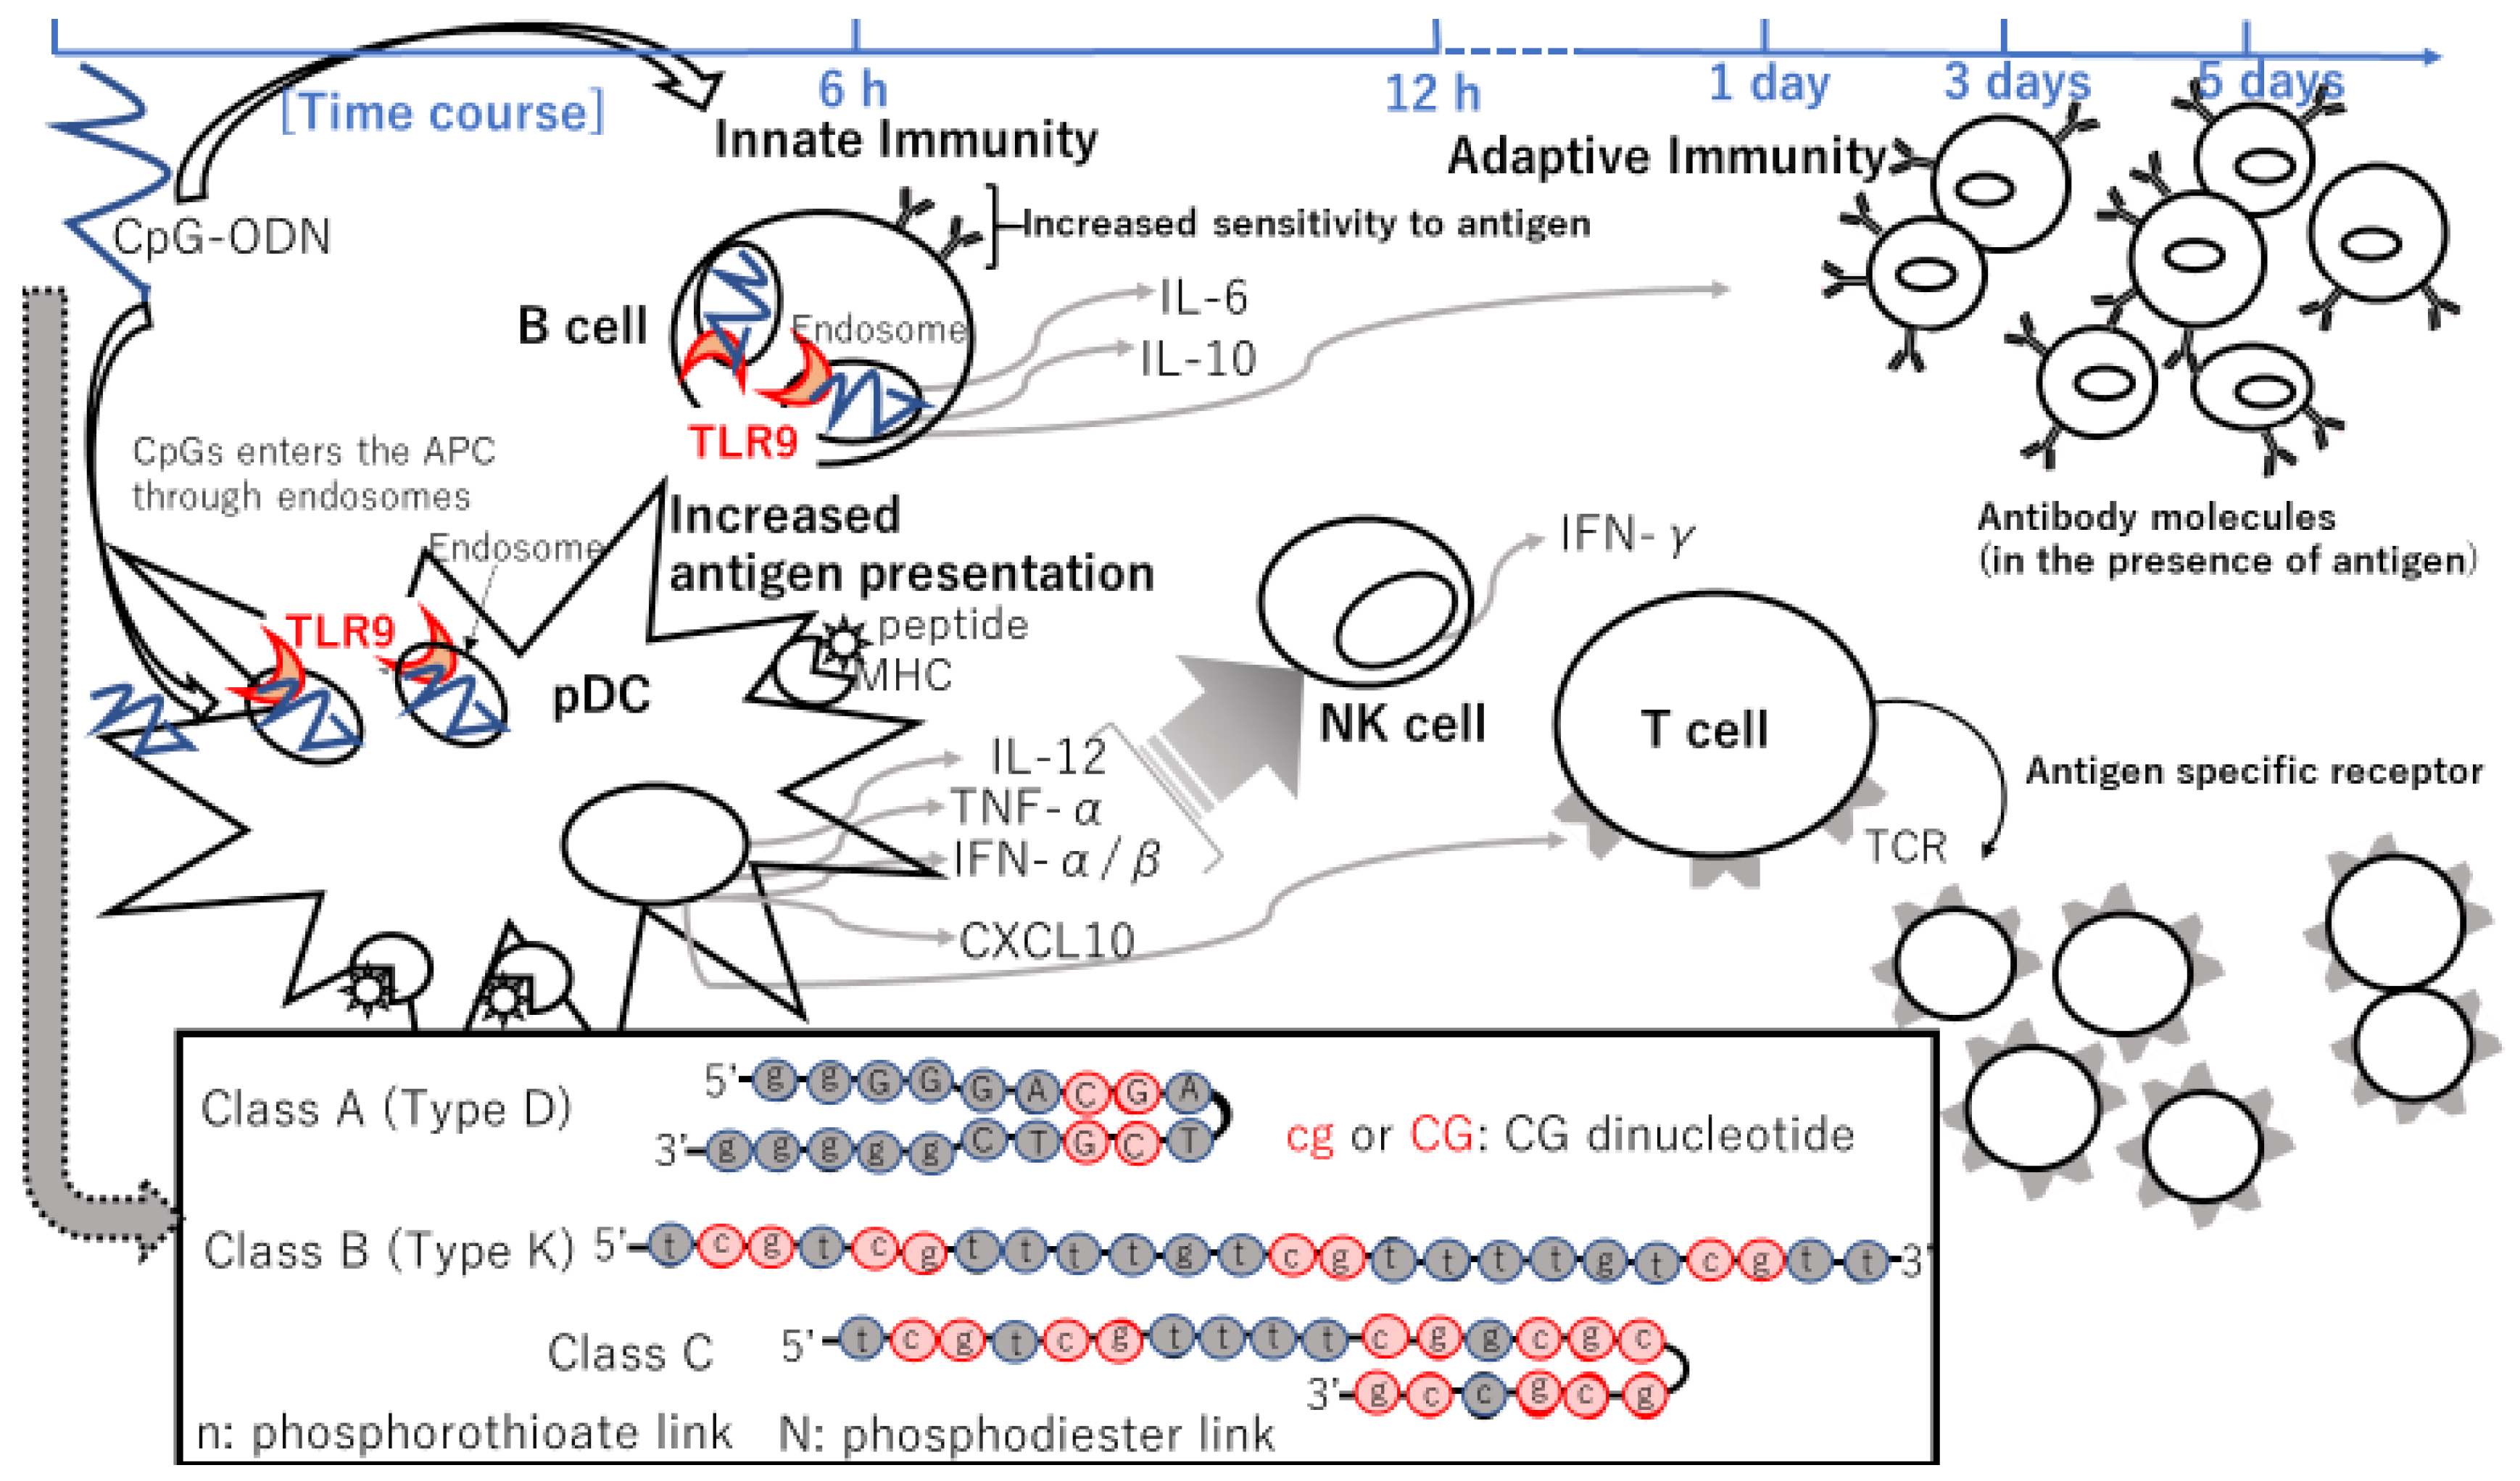 Cancers | Free Full-Text | Approaches of the Innate Immune System to  Ameliorate Adaptive Immunotherapy for B-Cell Non-Hodgkin Lymphoma in Their  Microenvironment | HTML